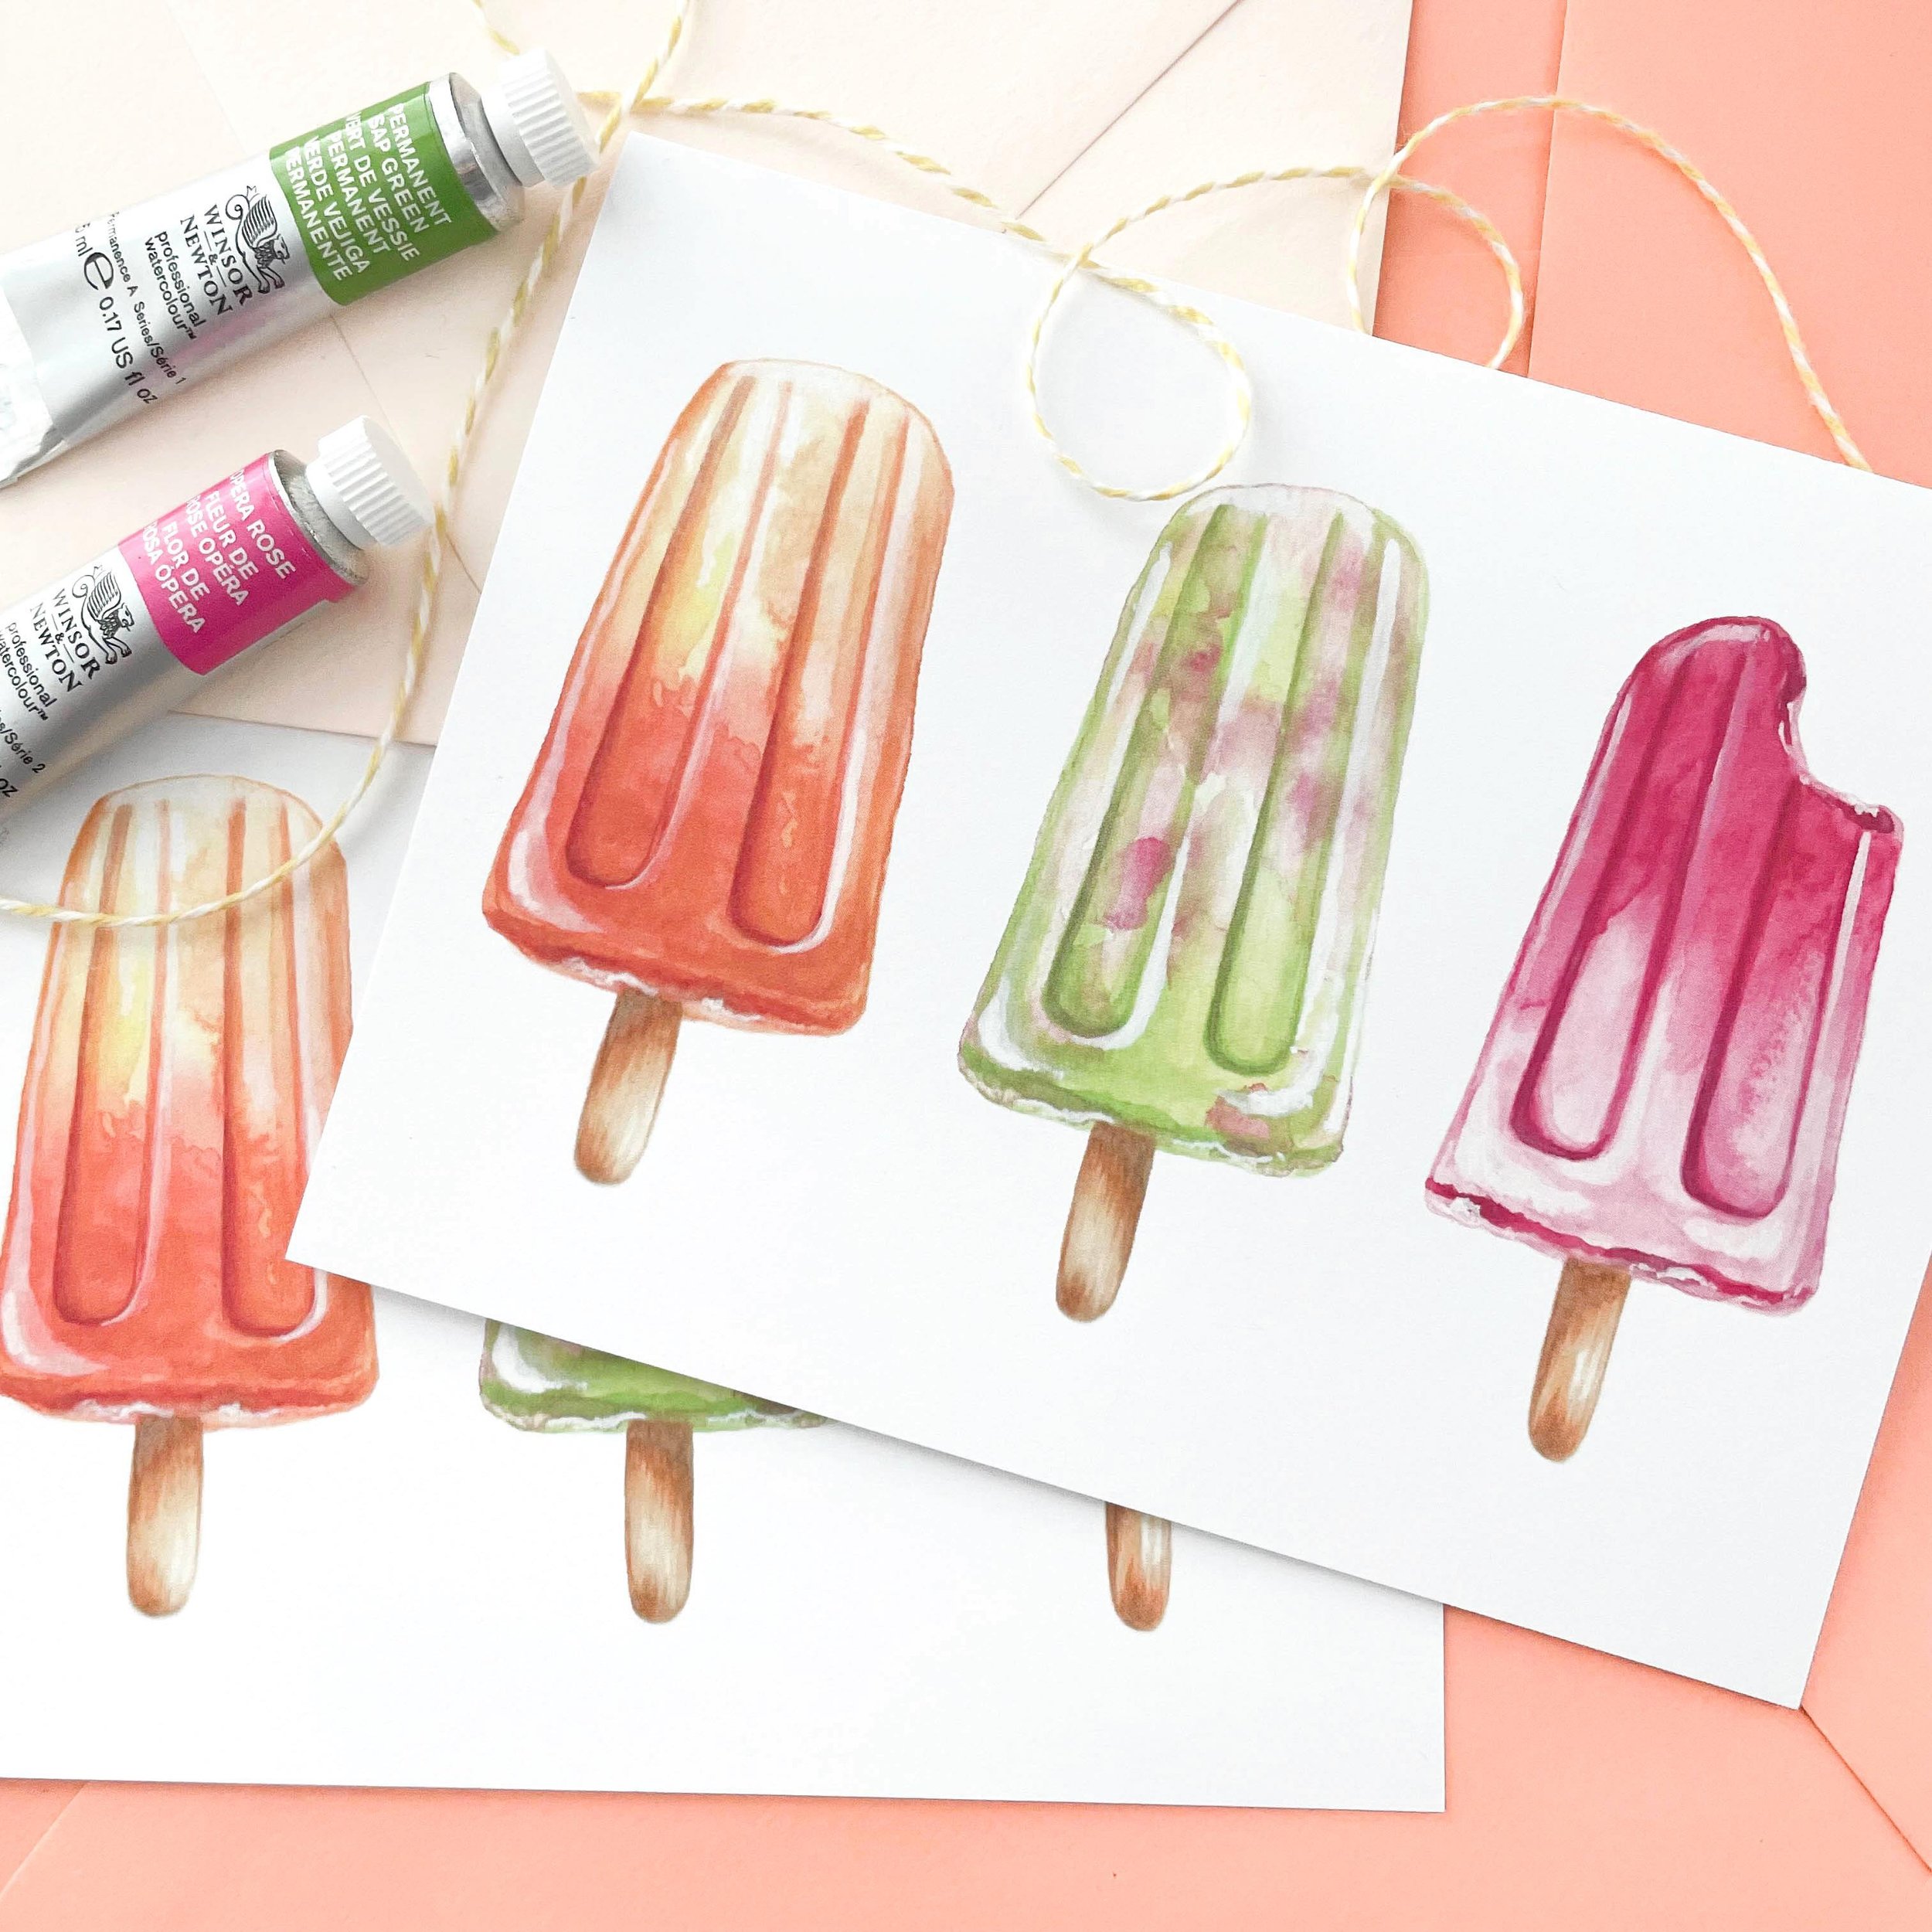 These bright and colorful mouth-watering popsicle greeting cards will surely sweeten someone&rsquo;s day! Available on my website, link in profile!